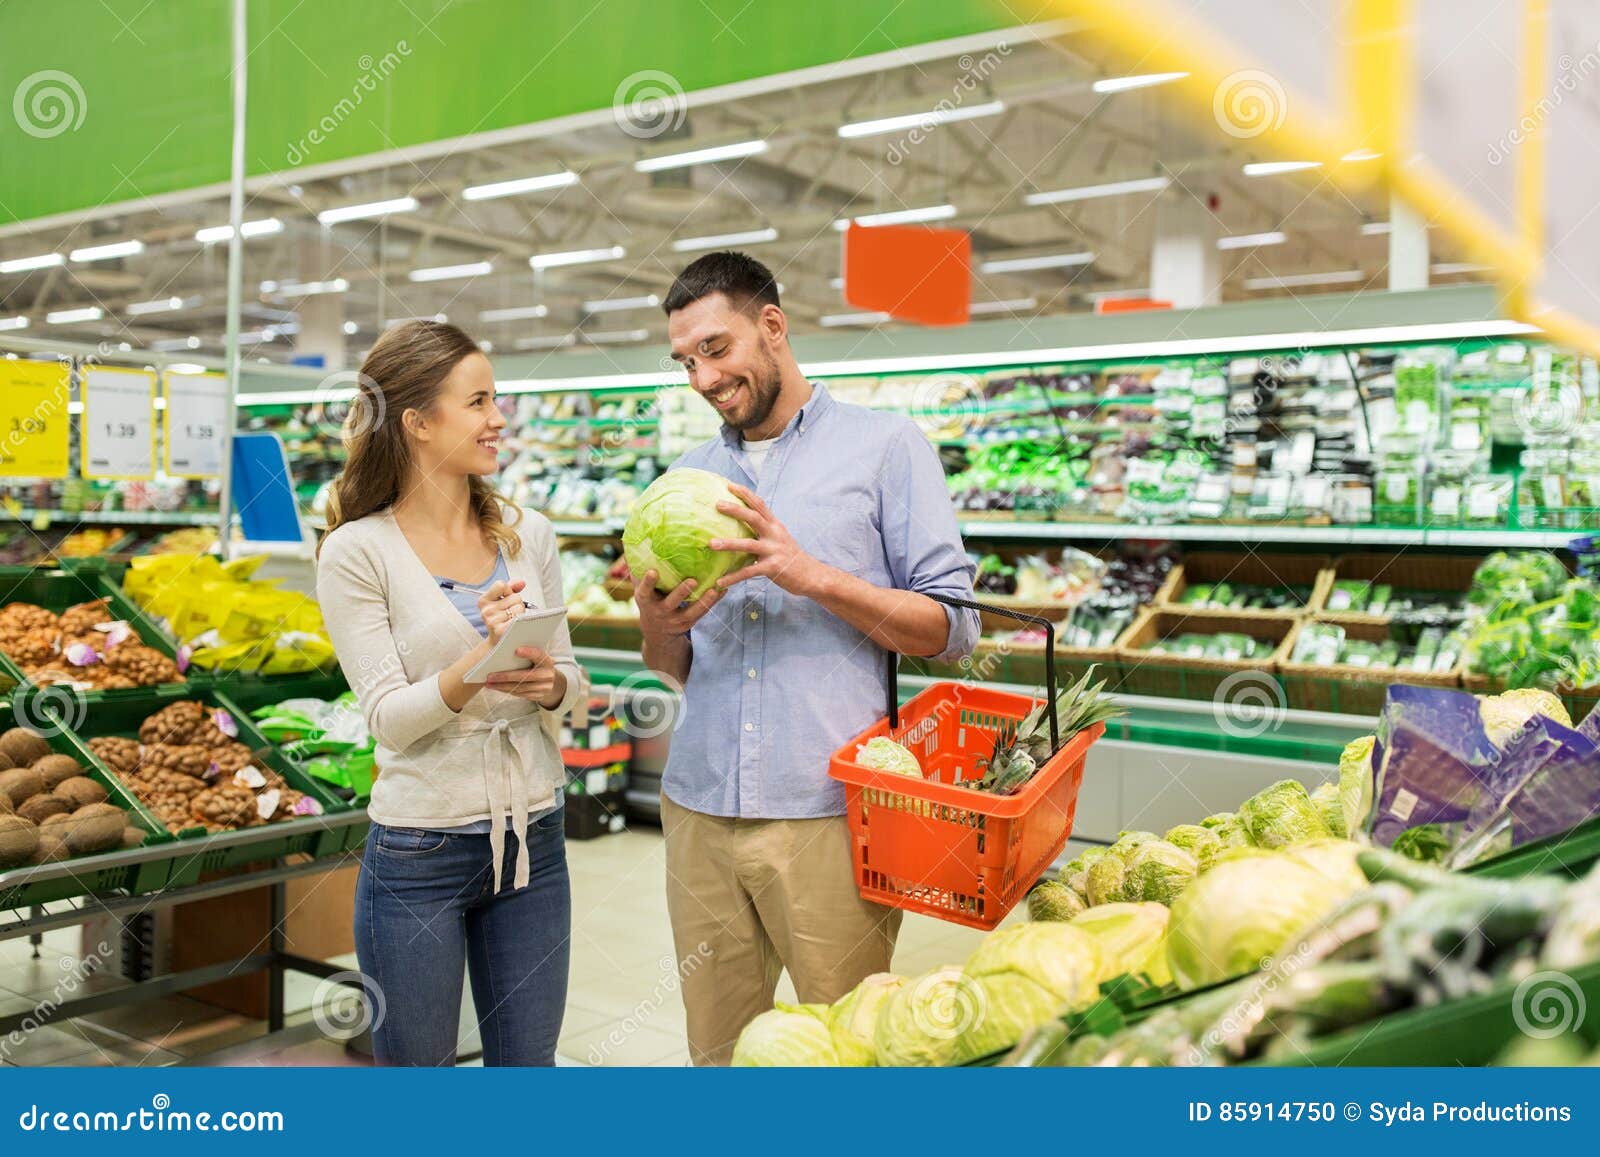 Couple With Food Basket Shopping At Grocery Store Stock